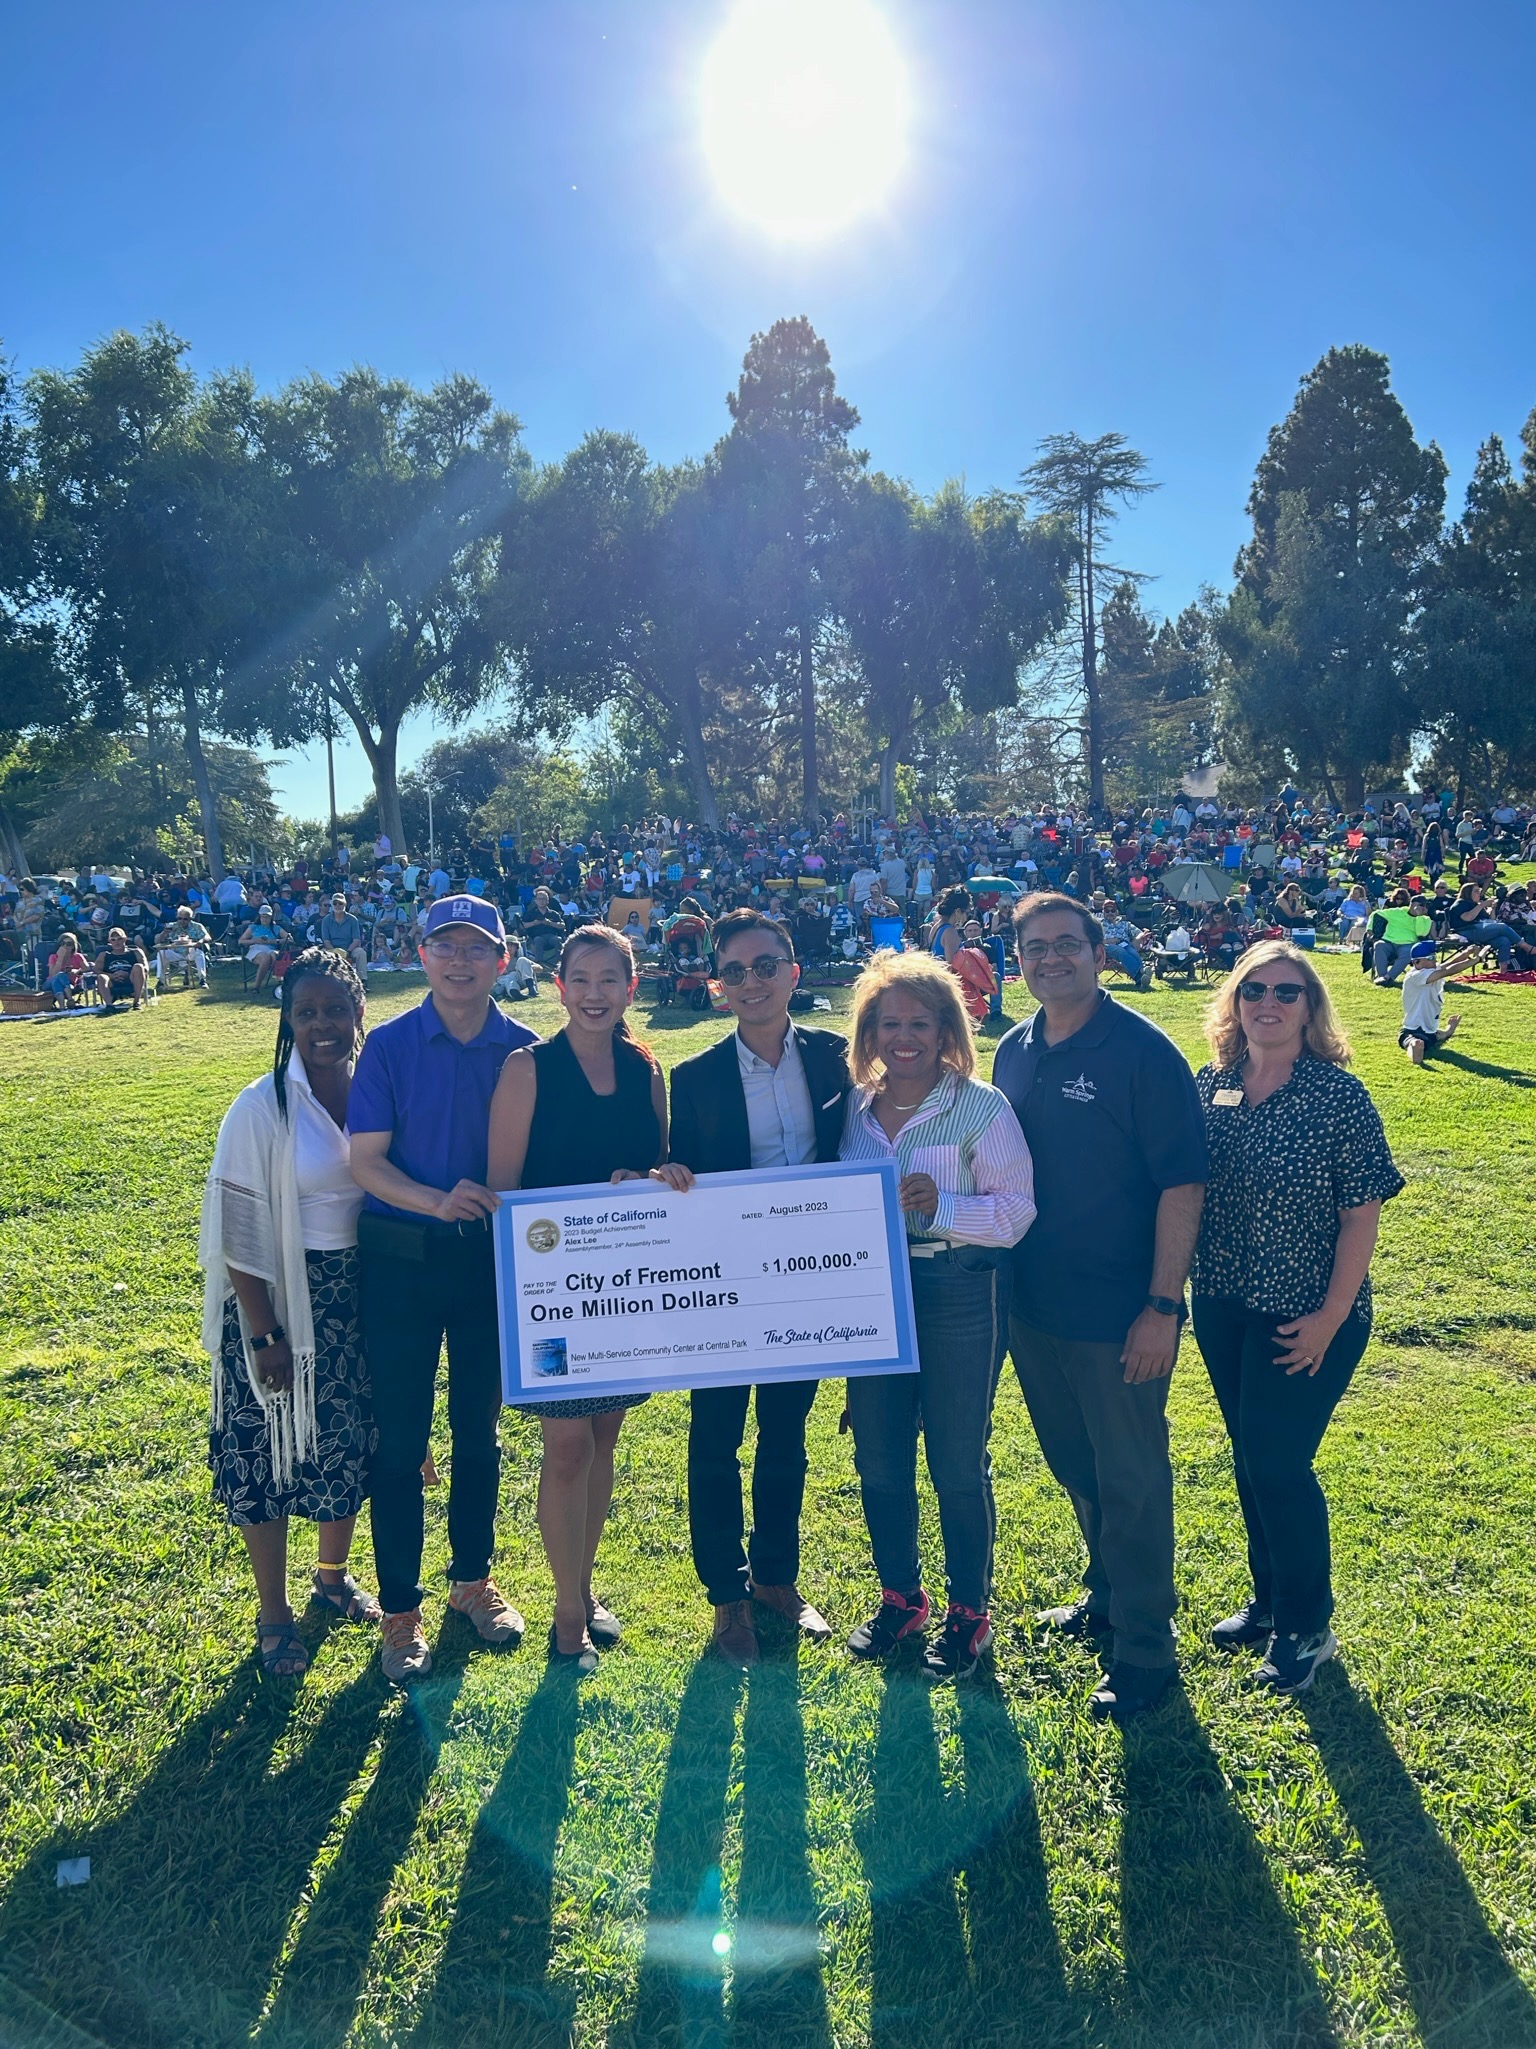 Assemblymember Alex Lee presents a ceremonial check of $1 million in state funding for Fremont's multi-use community center at Central Park